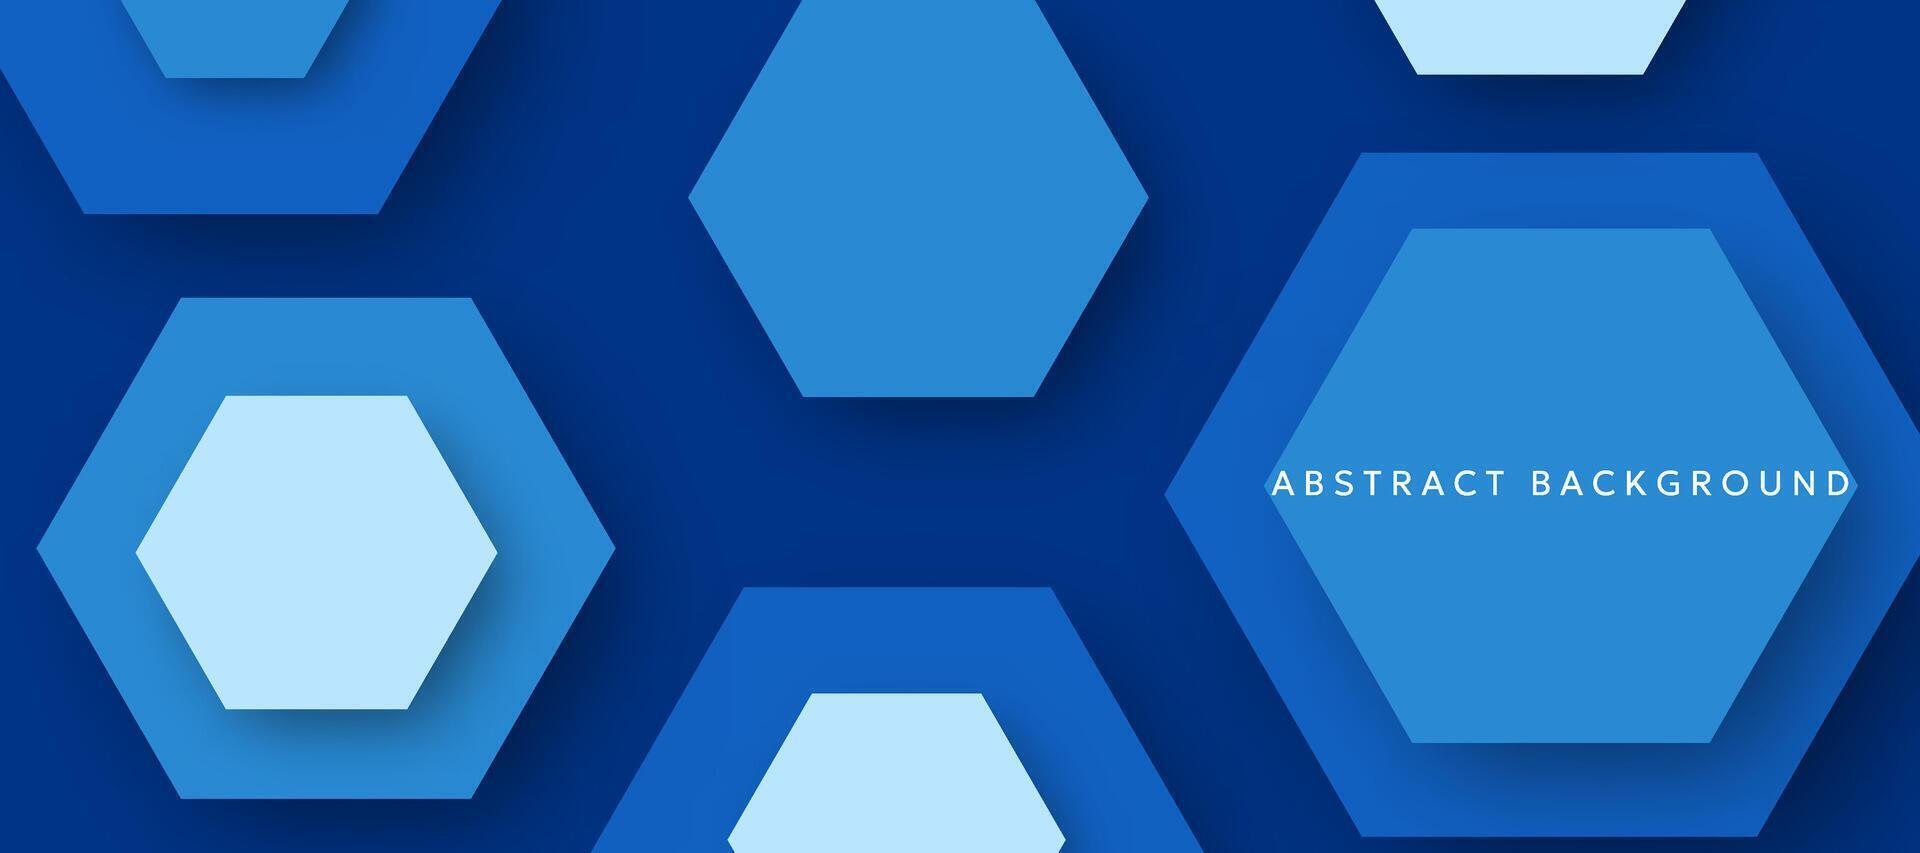 Blue hexagonal abstract three-dimensional background vector